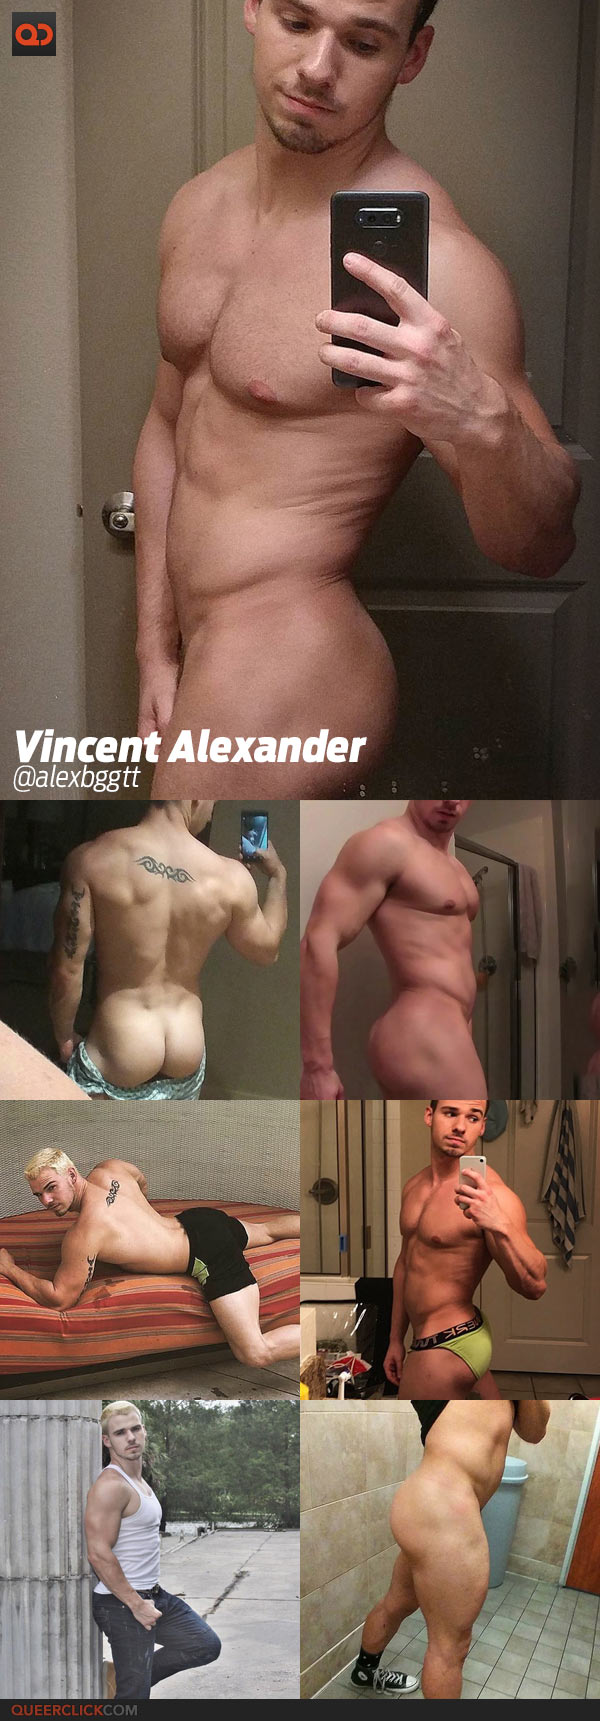 Seven Bootylicious Guys You Are Going To Drool Over On IG!